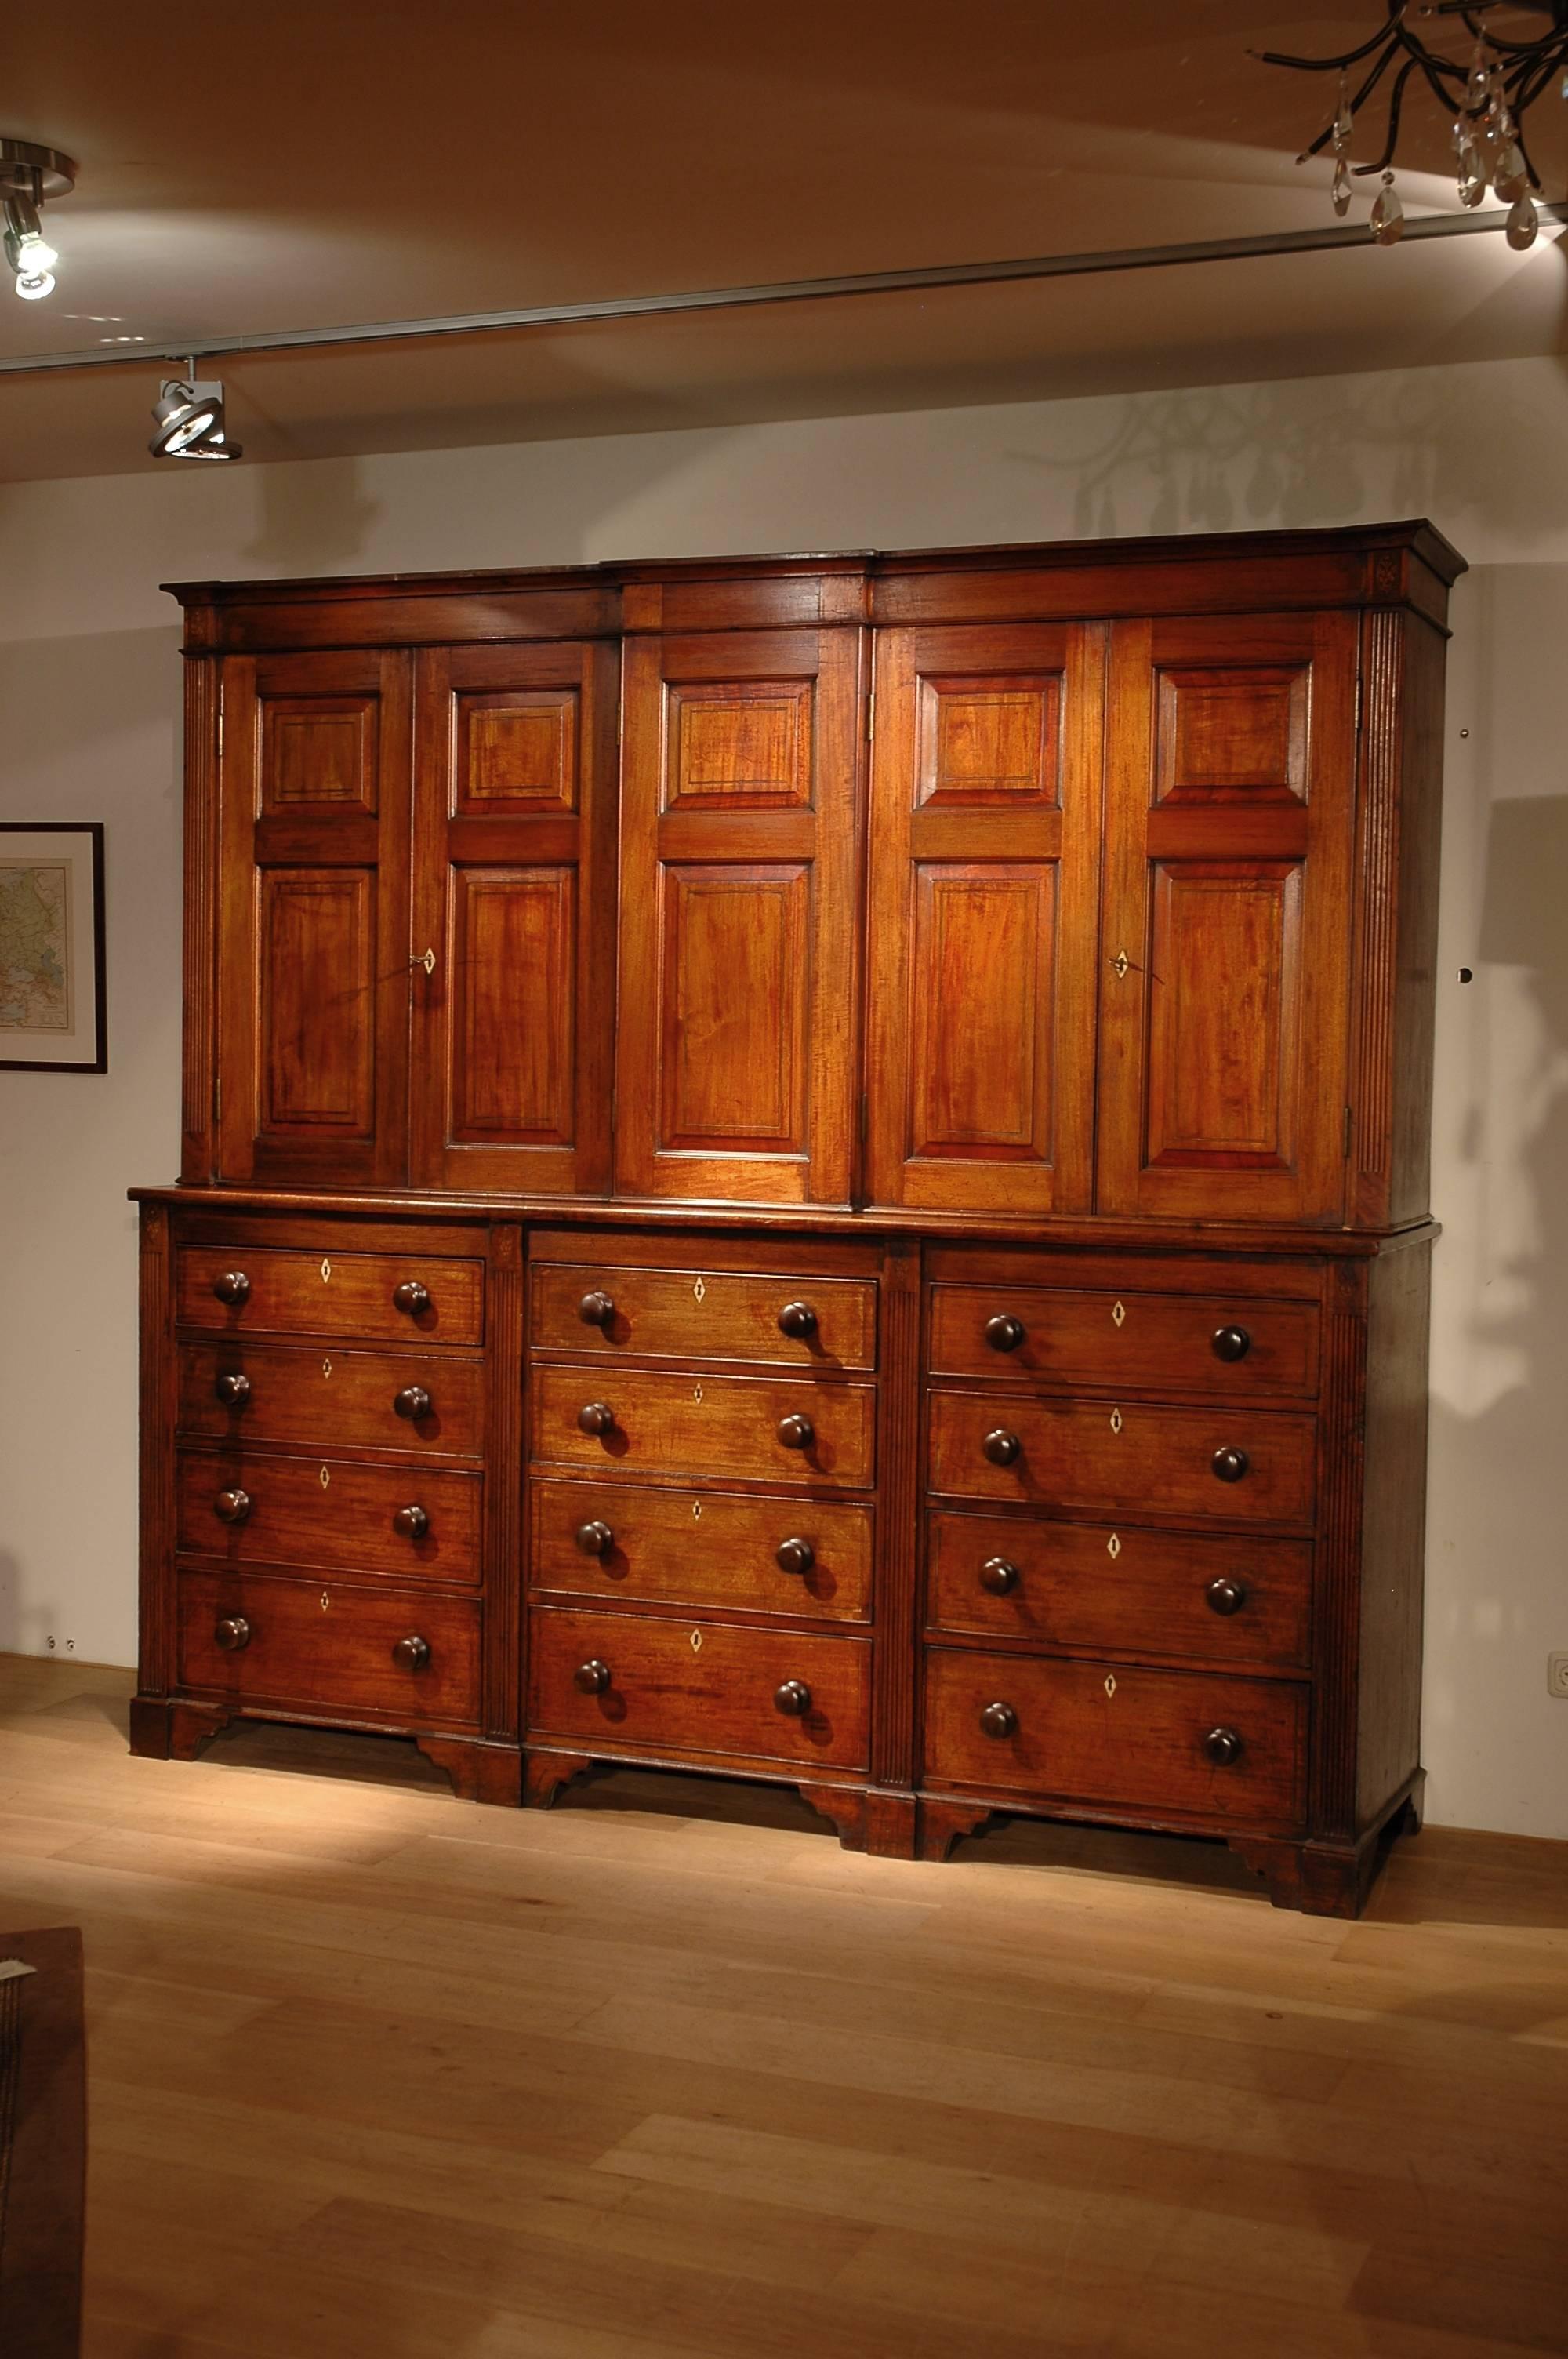 Beautiful English a superb George III period housekeepers cupboard, or dresser in mahogany. This piece of furniture is of very generous proportions and oozes country house estate charm. Very well made in solid mahogany with subtle decorations. For